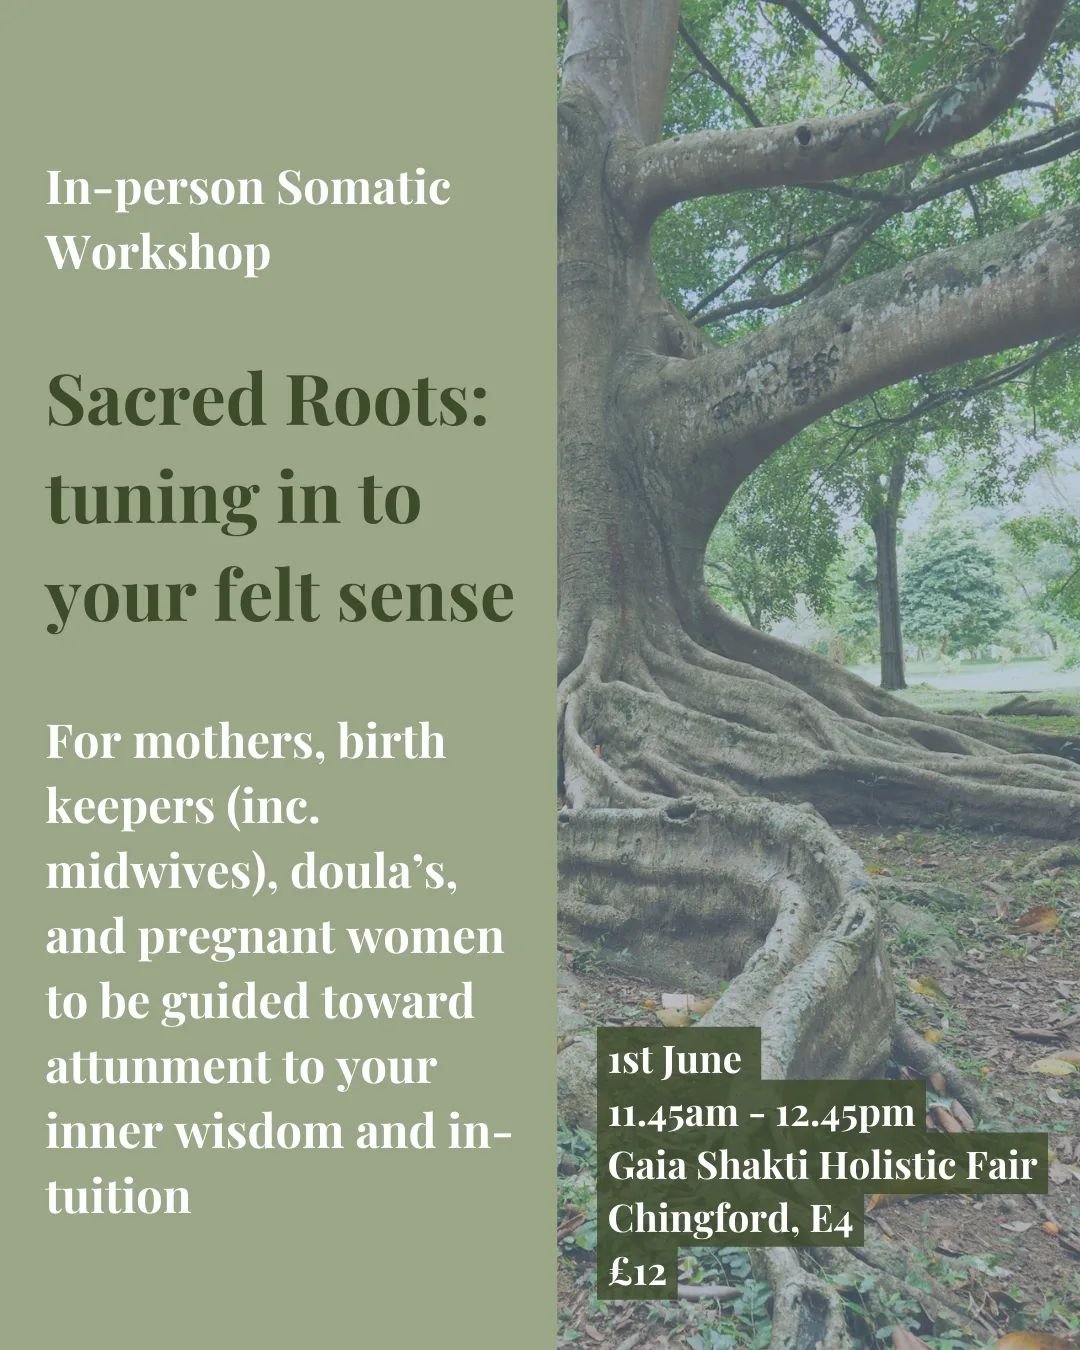 🌳 IN-PERSON WORKSHOP 🌳

There is infinite wisdom flowing through our bodies. 

A busy thinking brain can often dampen our connection to that wisdom and reduce our ability to know it, or hear it. 

In this workshop, you will be guided, to the level 